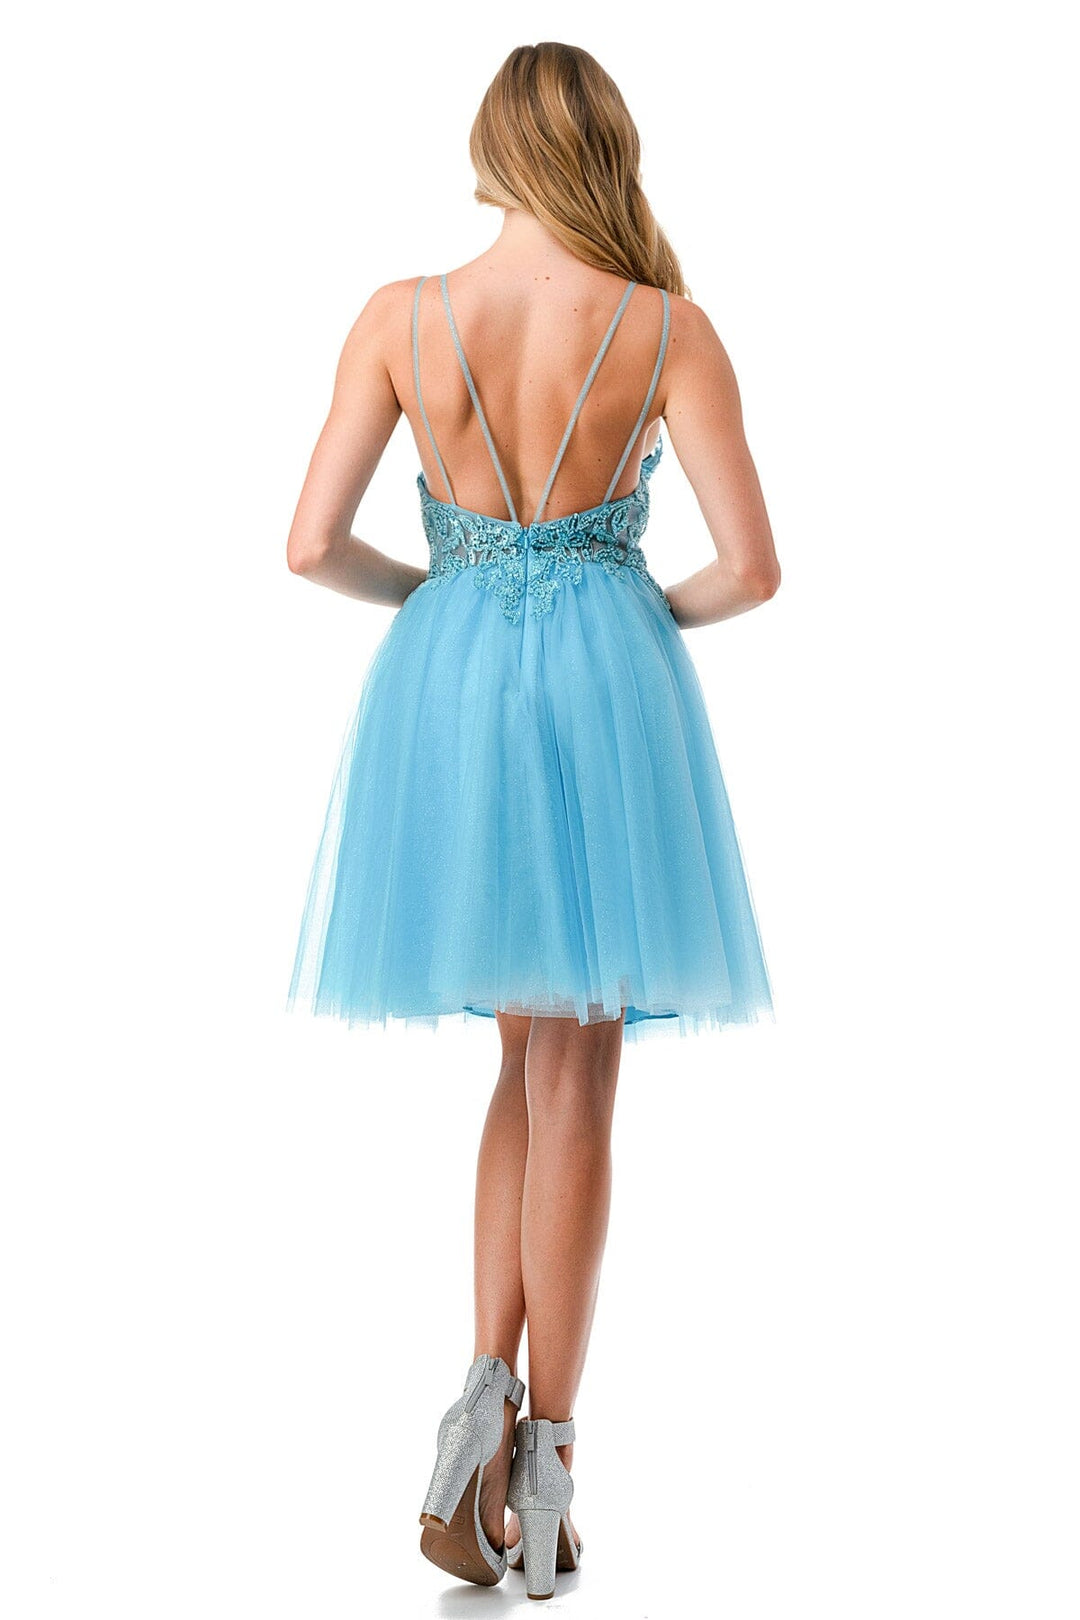 Embroidered Short Sleeveless Tulle Dress by Coya S2648